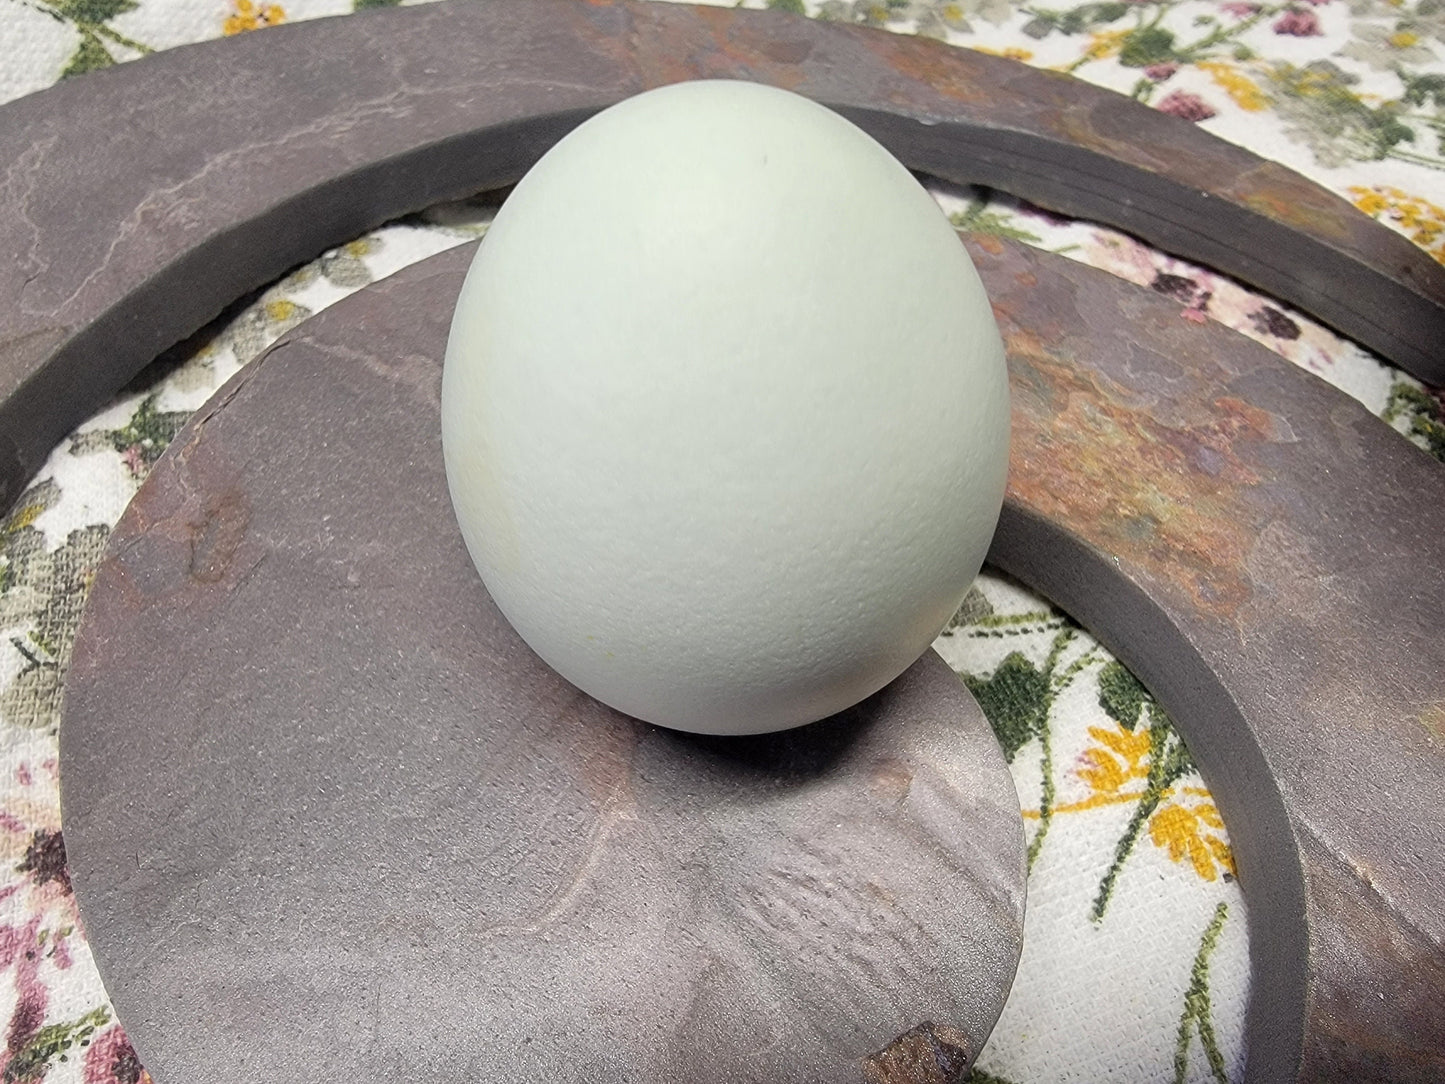 Blue Chicken Eggs, 6 Eggs, Rooster Exposed - Ameraucana Mix (Puffy Cheek Chickens)